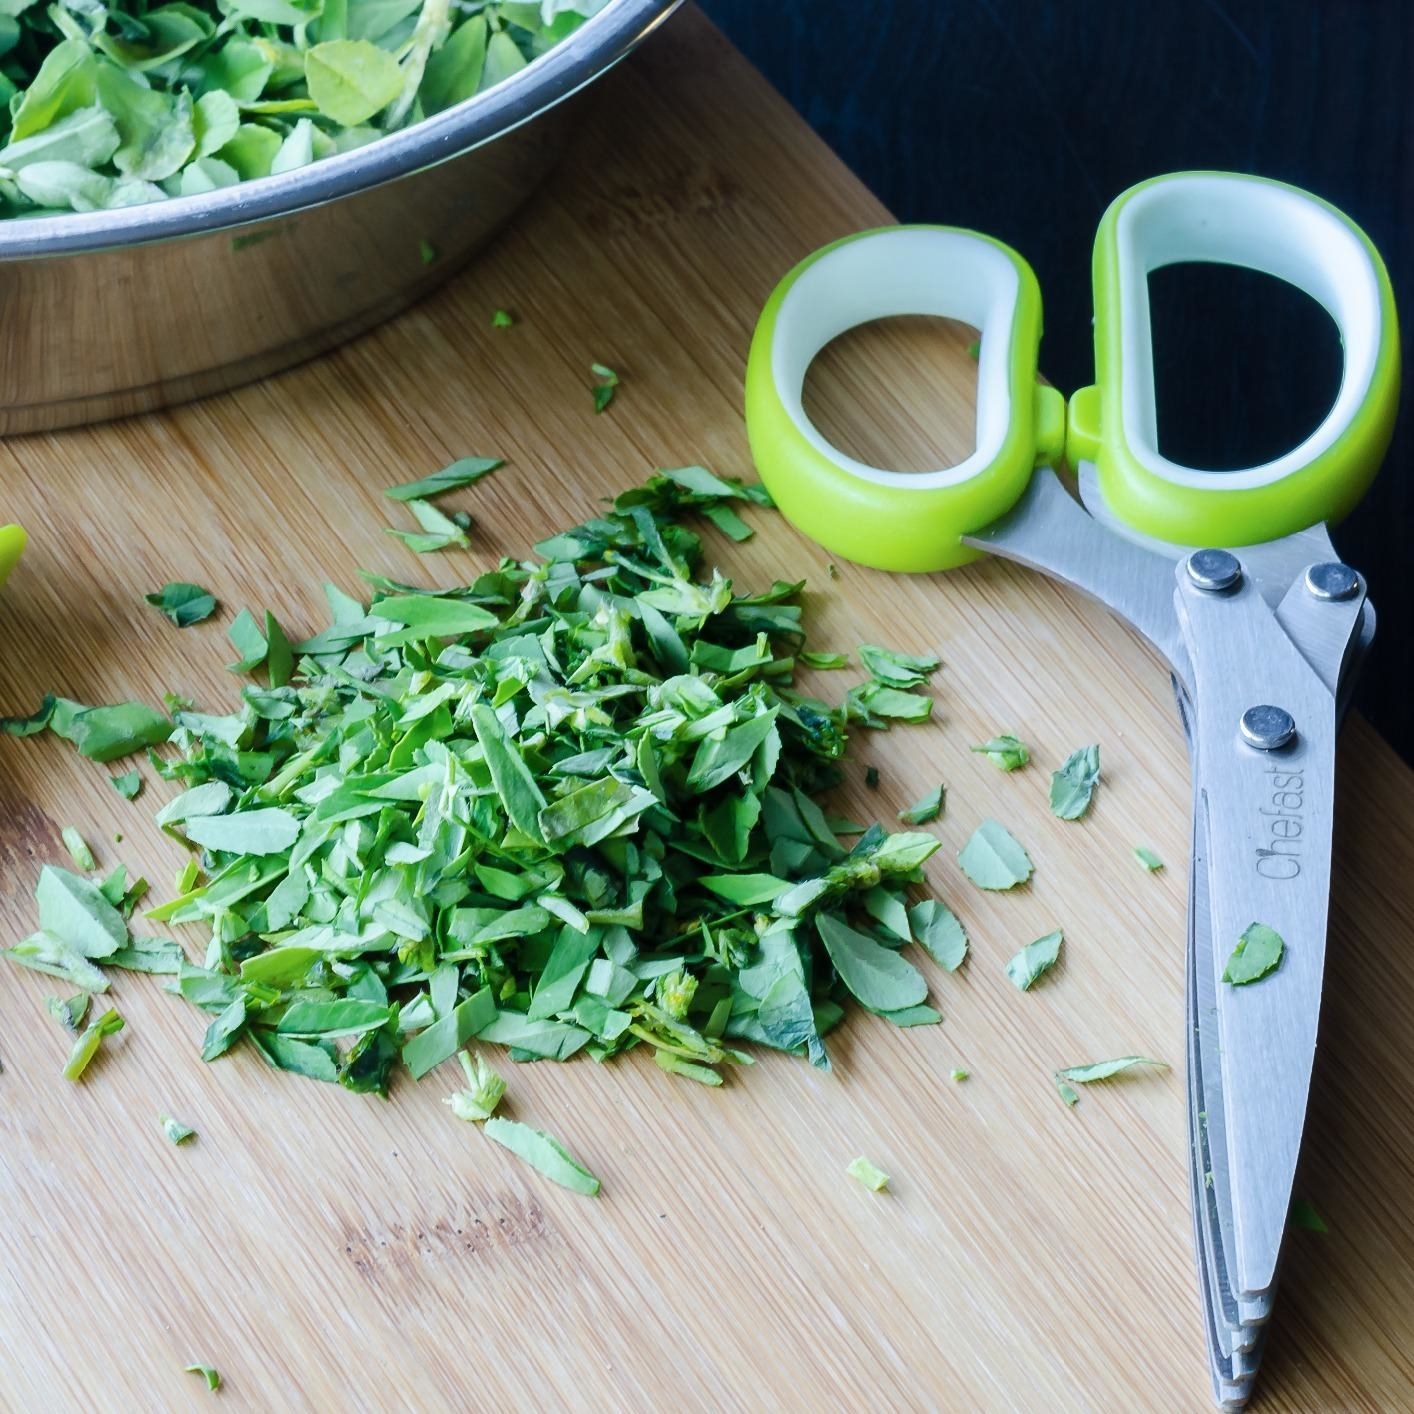 Reviewer pic of the scissors with a green handle to cut up fresh herbs on a cutting board